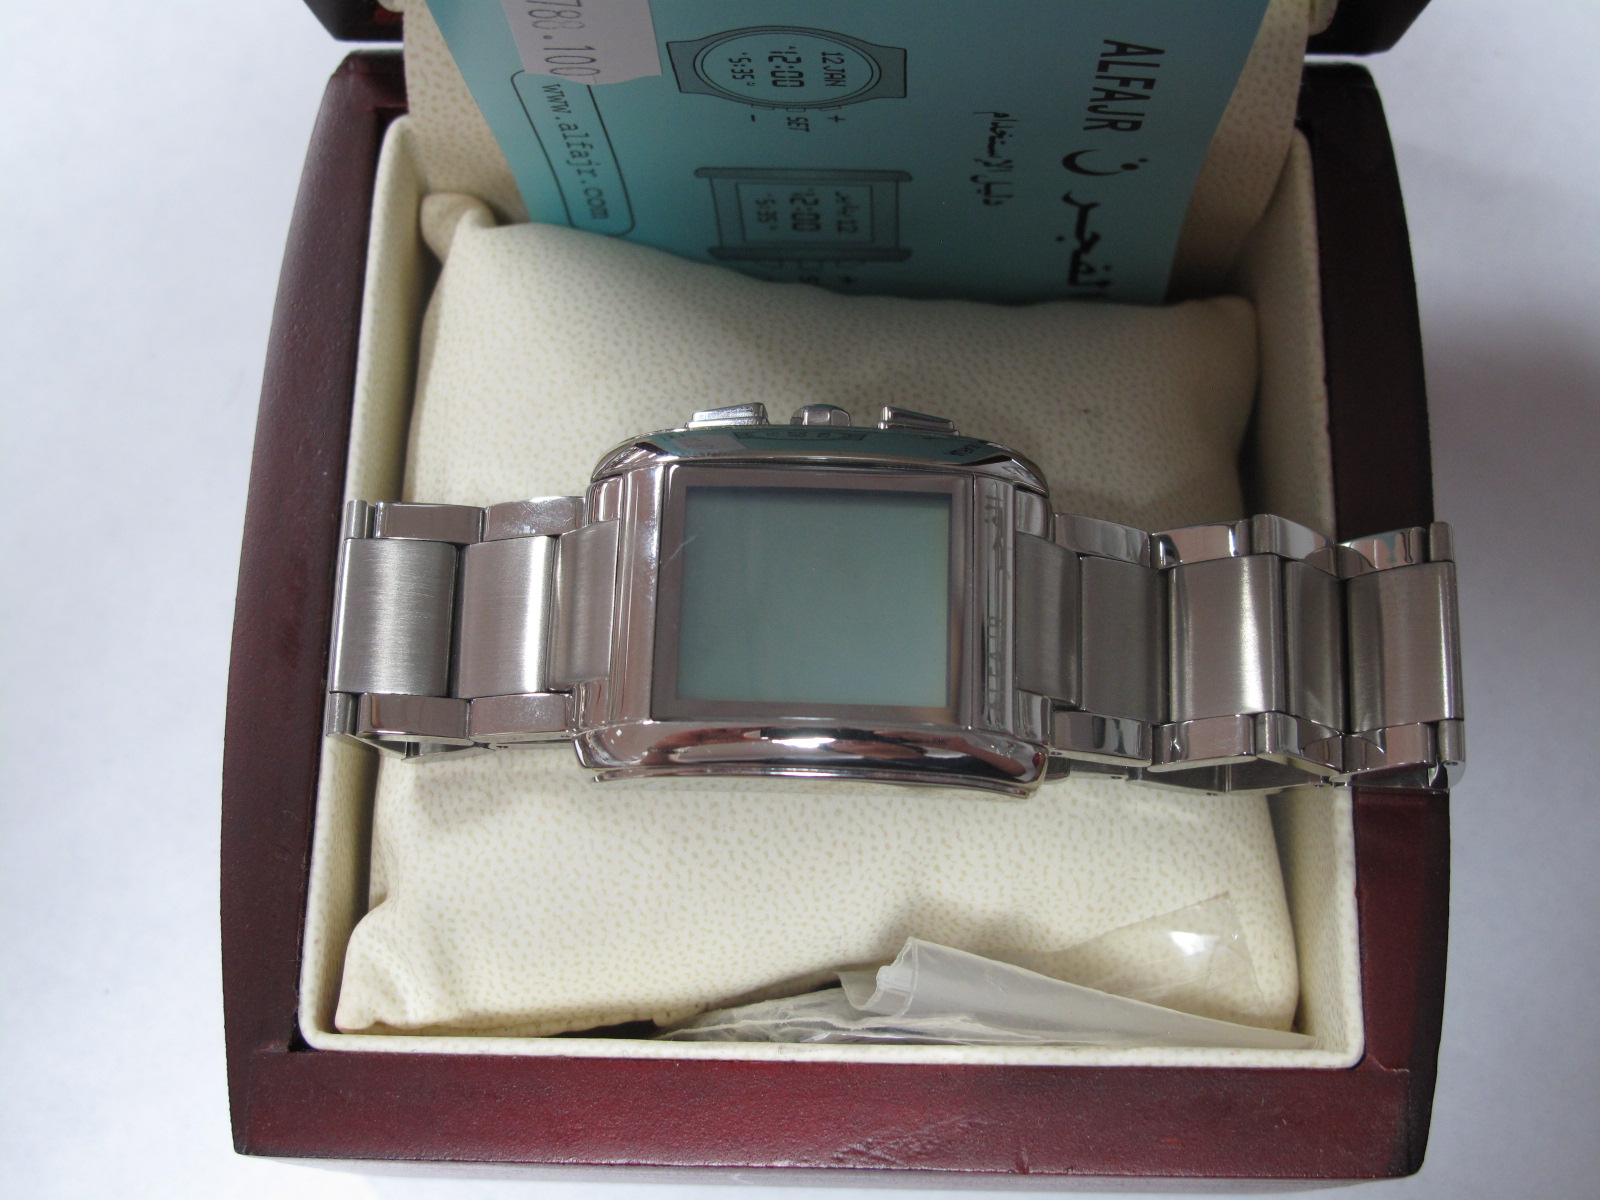 ALFAJR Modern Gent's Digital Wristwatch, ref WS-06 B, in original box with booklet and spare